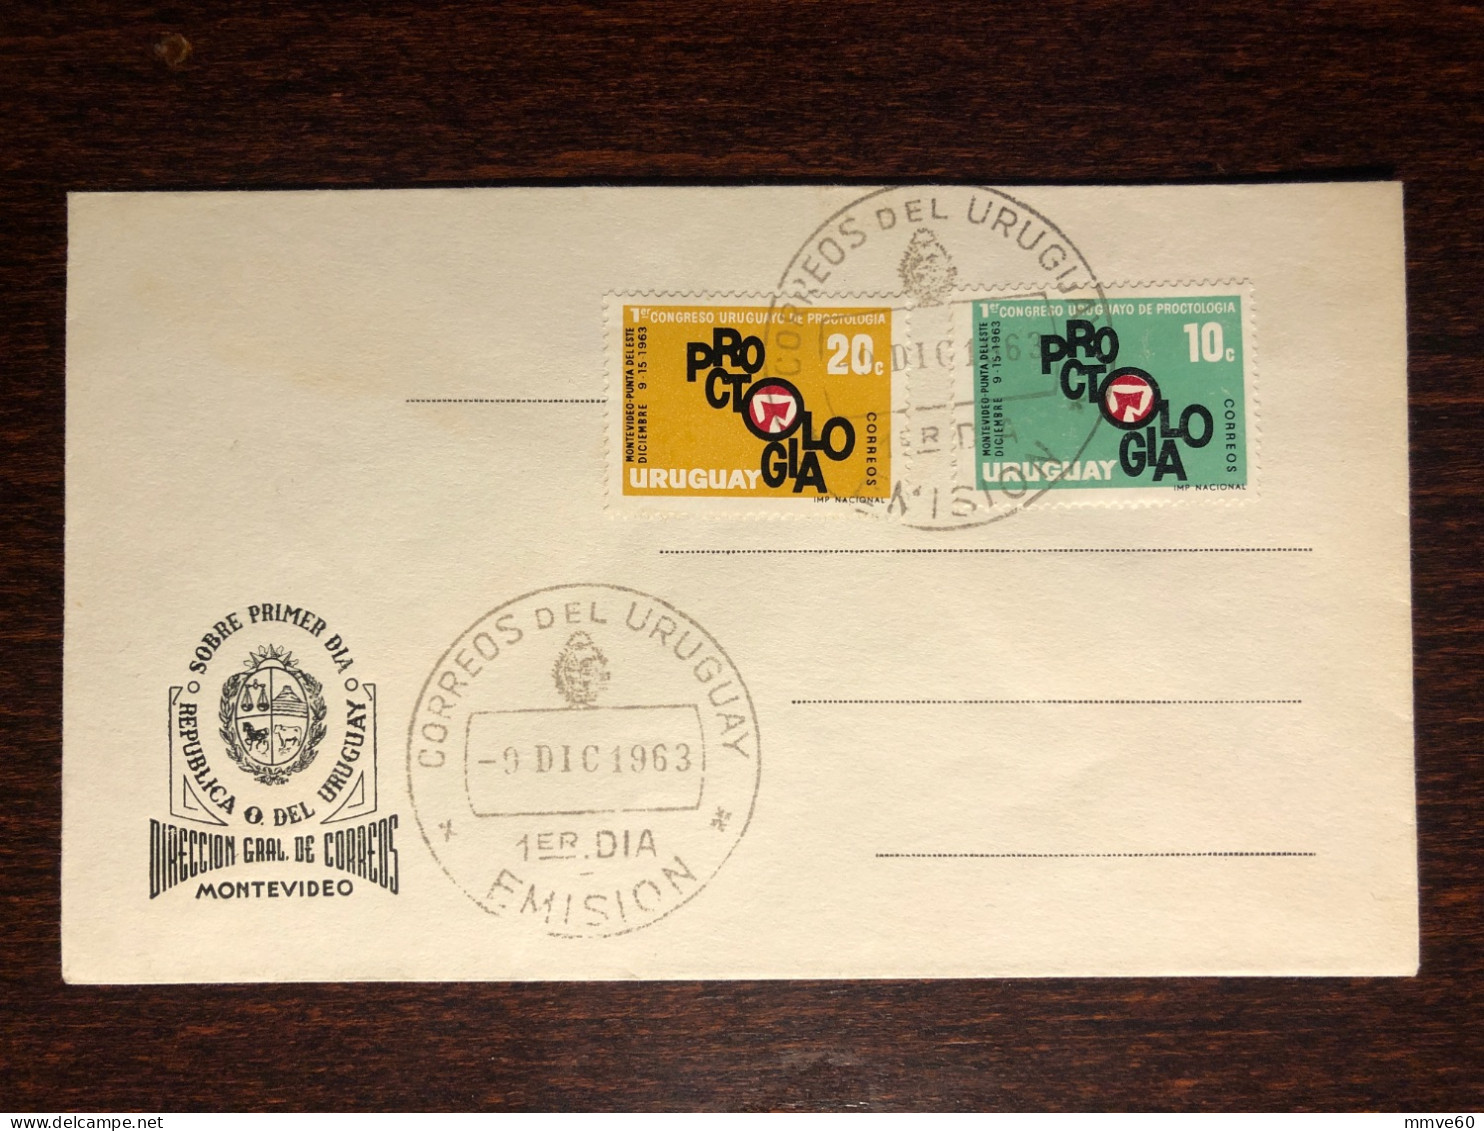 URUGUAY FDC COVER 1963 YEAR PROCTOLOGY HEALTH MEDICINE STAMPS - Uruguay